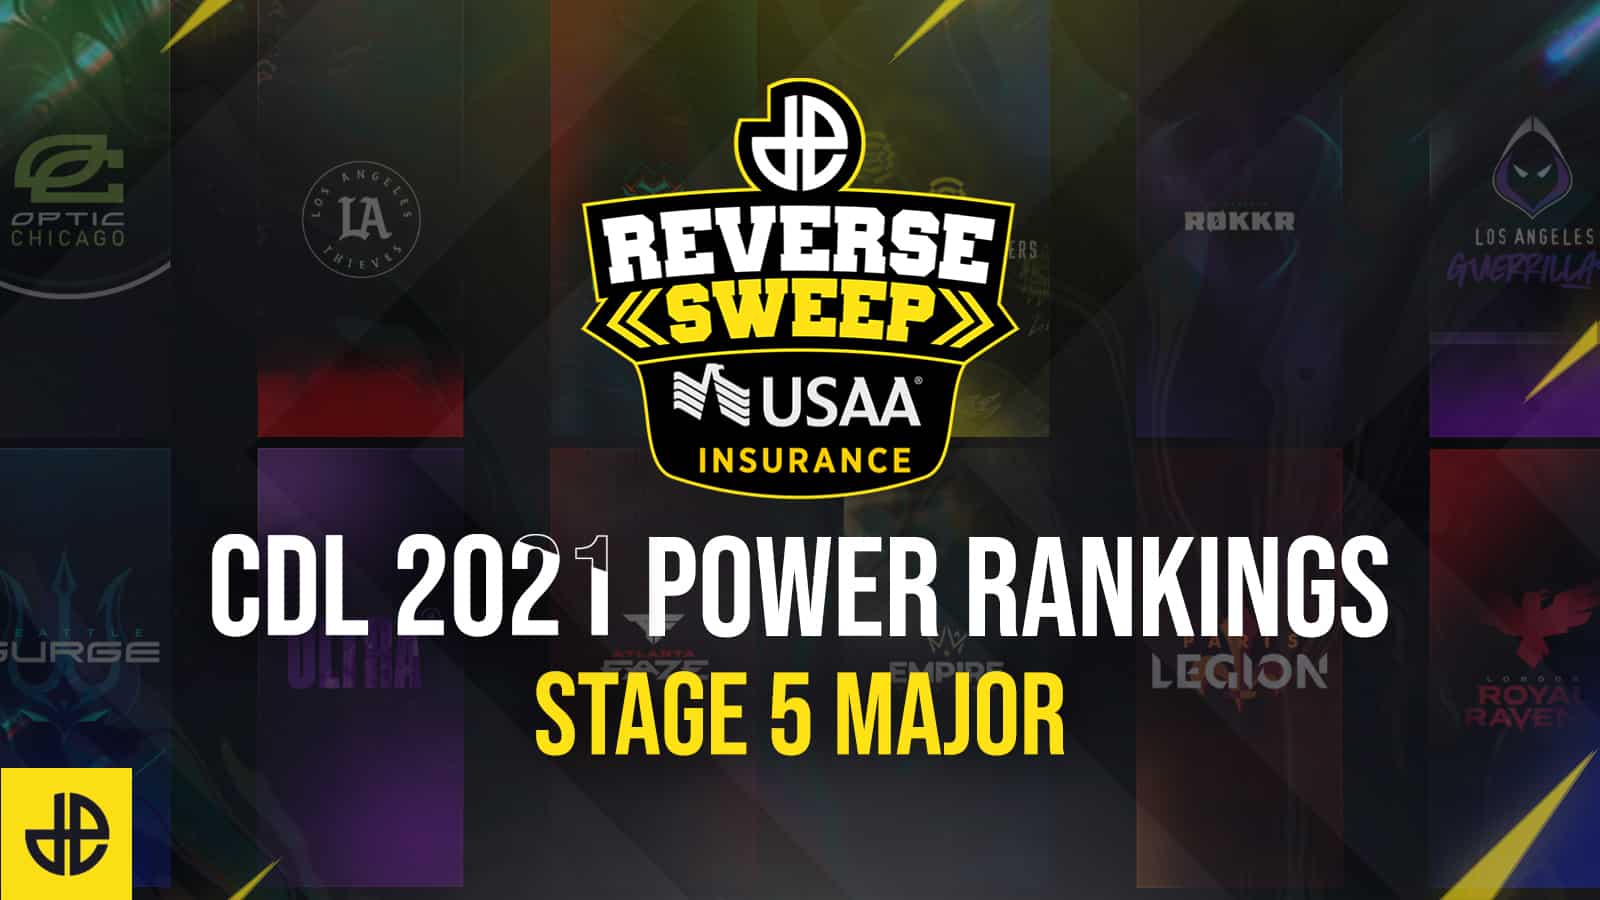 CDL Stage 5 Major power rankings